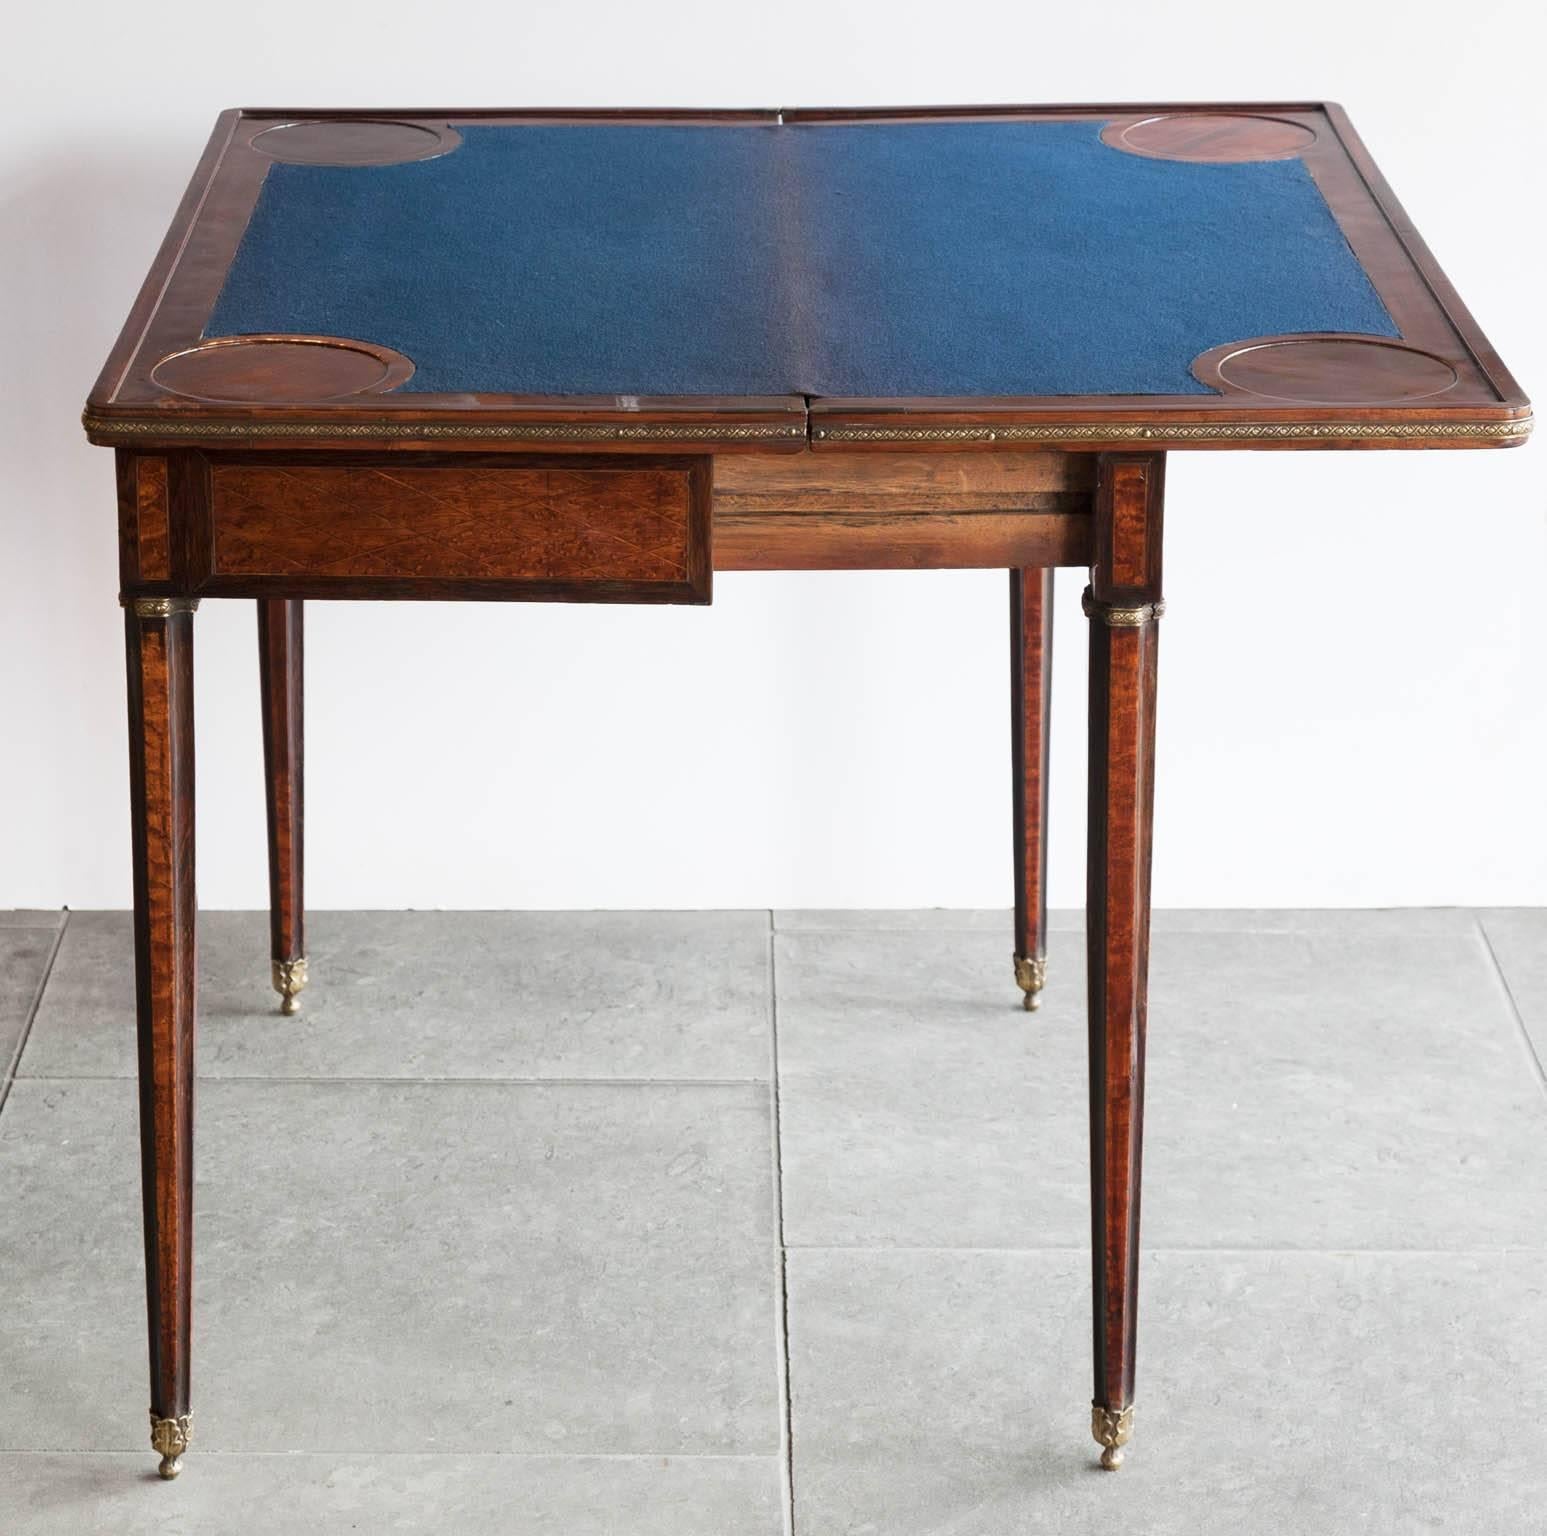 Having a geometrical marquetry hinged top with enclosing a blue baize game surface. Cast brass edging around the folded top.
Standing on slender fluted legs with brass rings, terminating in brass caps cast in the shape of oak leaves. The Table is